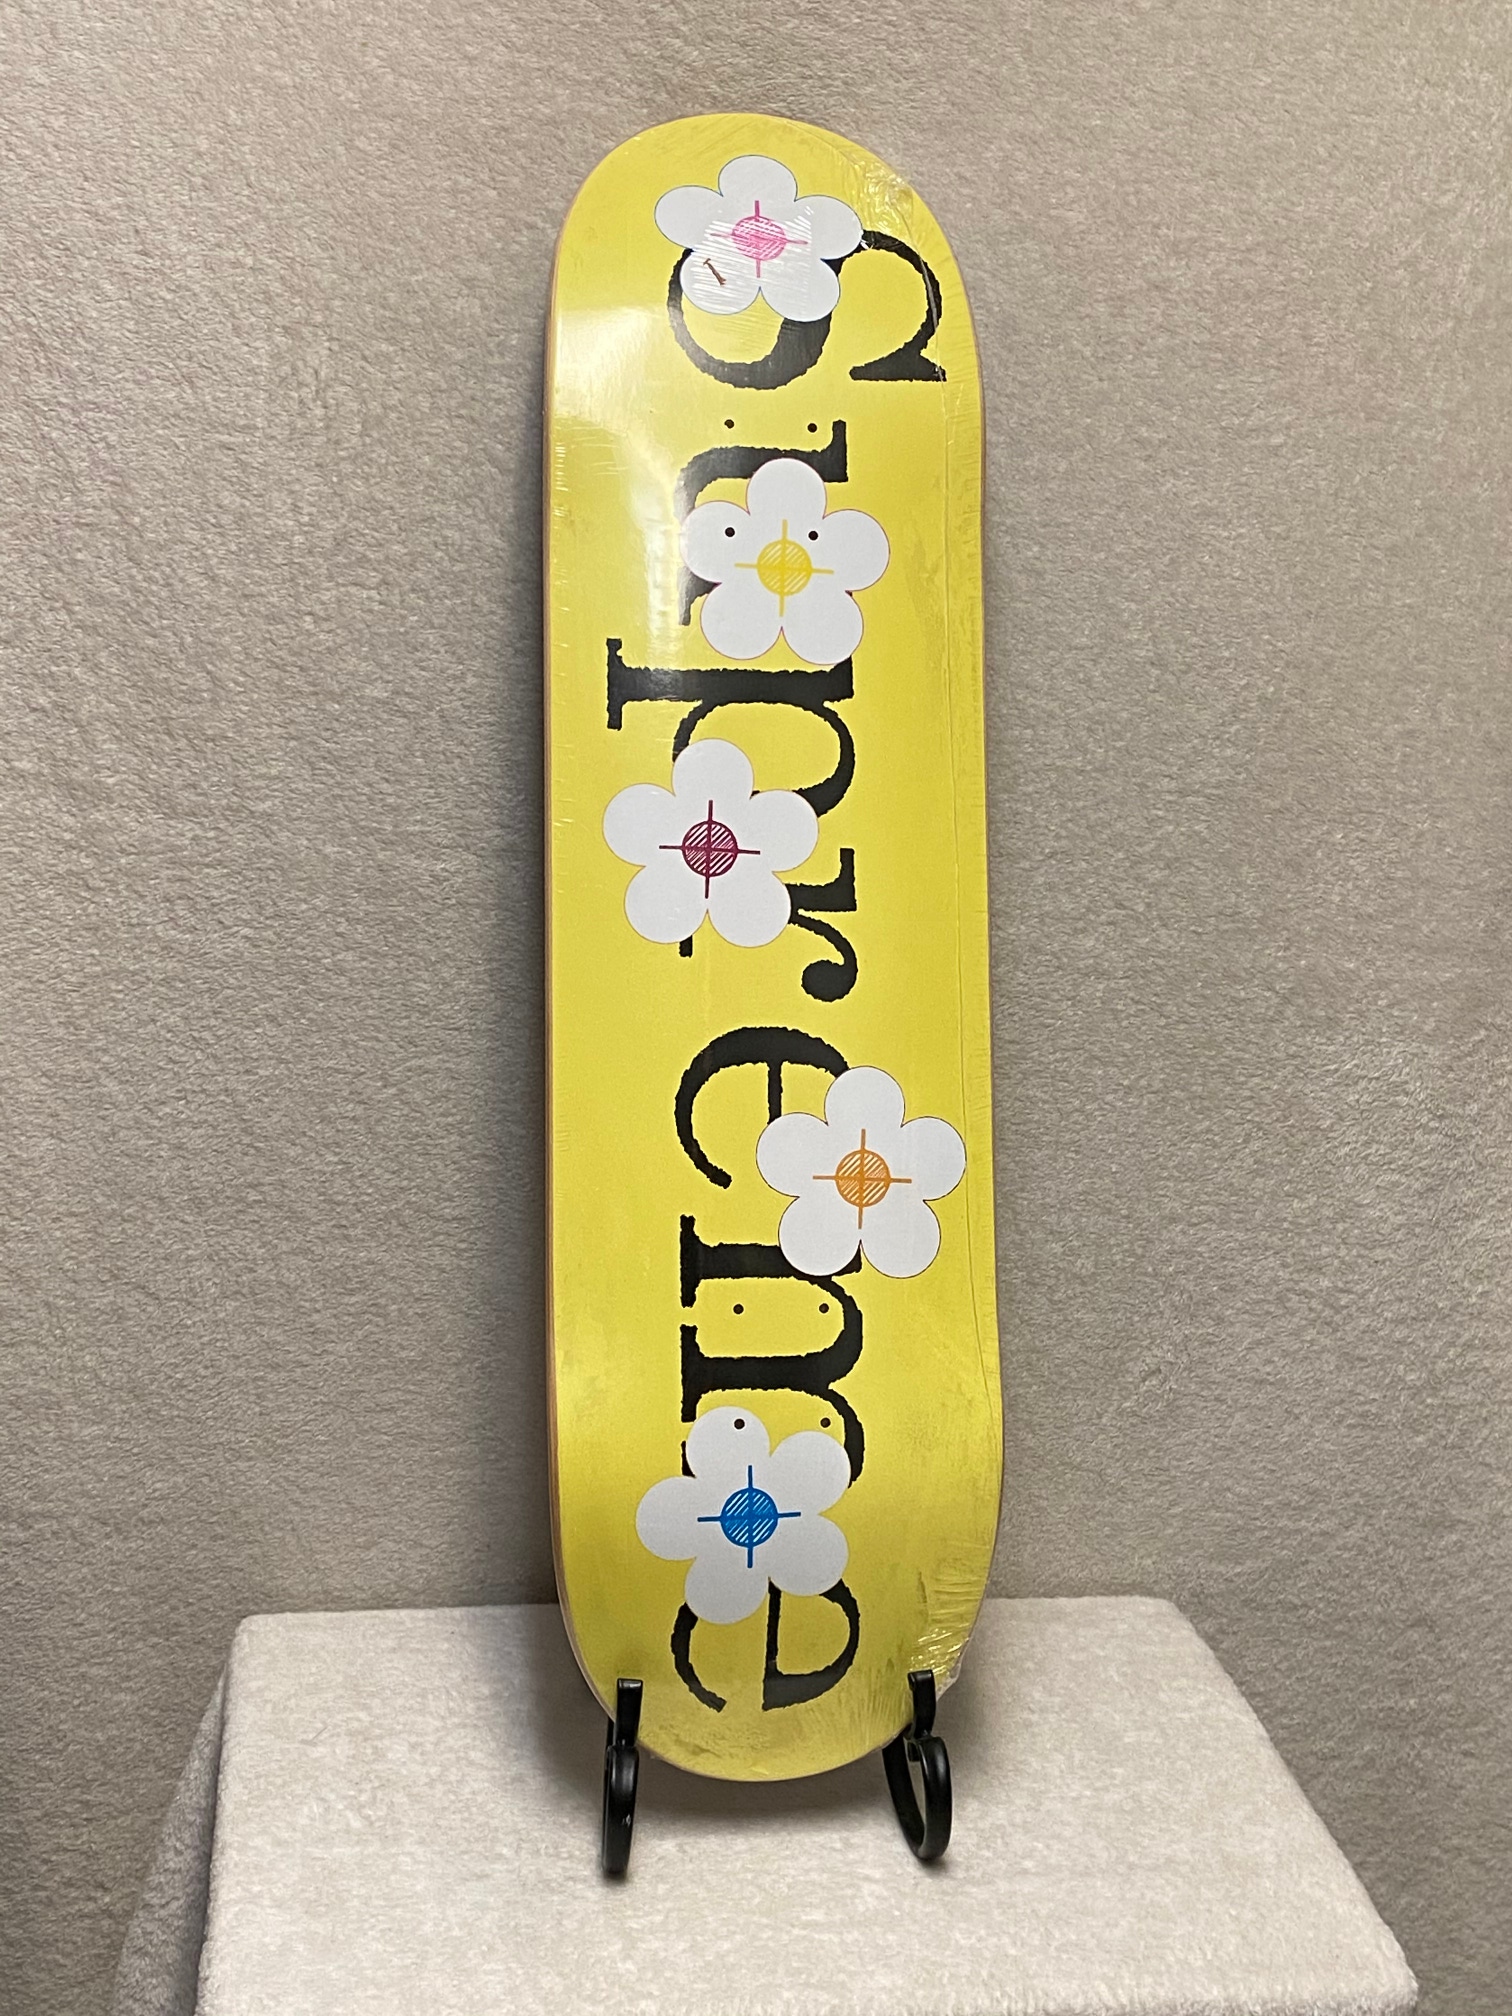 Supreme Flowers Skateboard Deck SS17 Yellow/Multicolor Box Logo "Been Hit" New